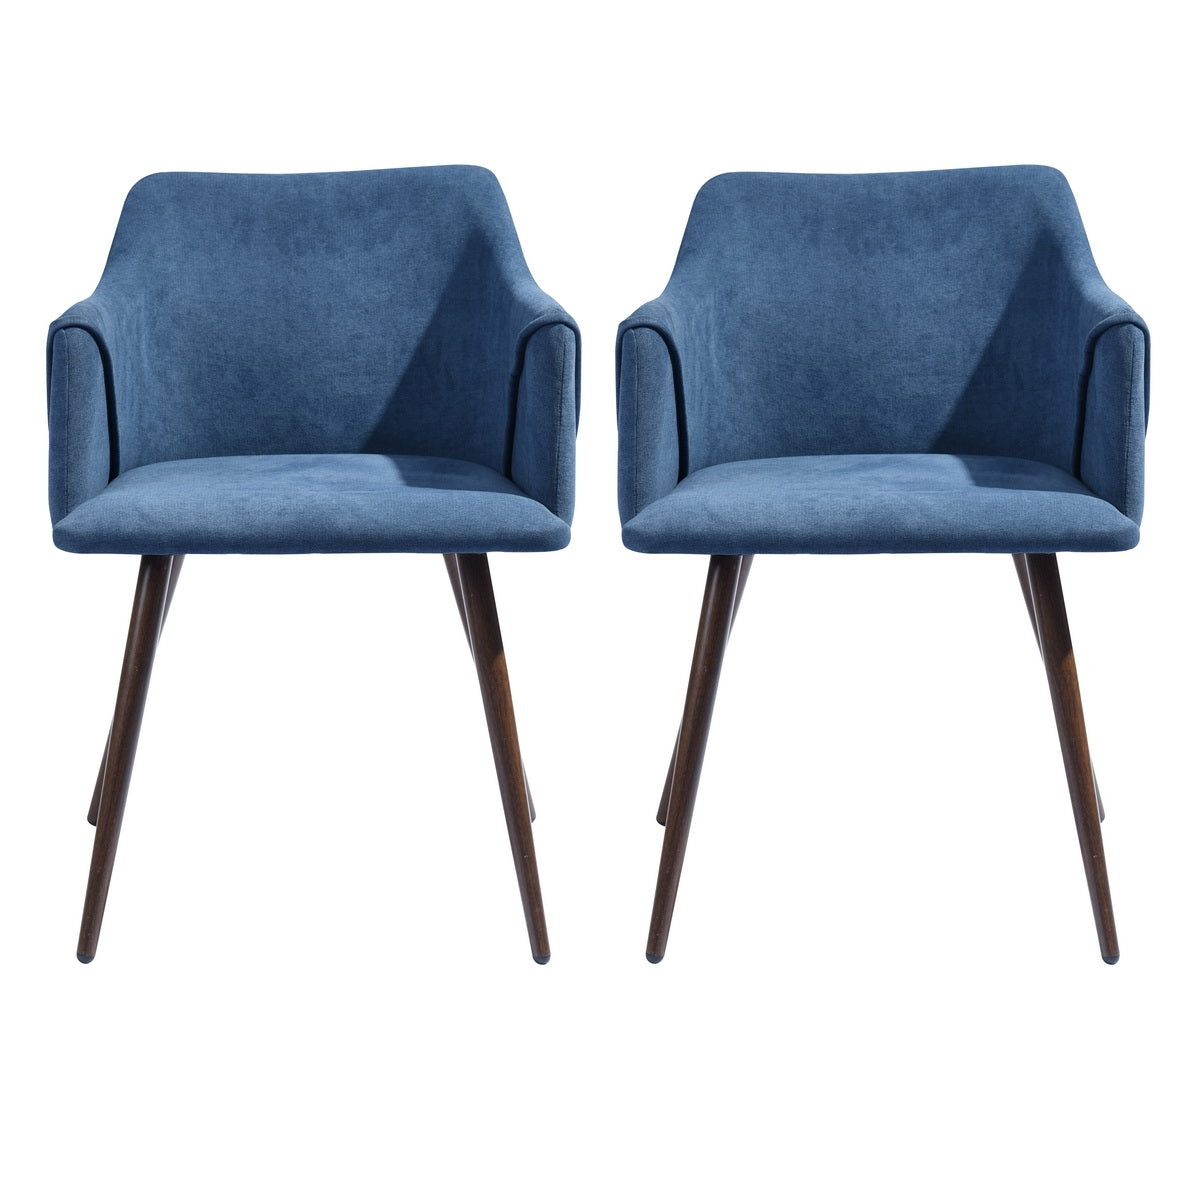 Set of 2 Dark Blue Dining Chair  Side Chairs